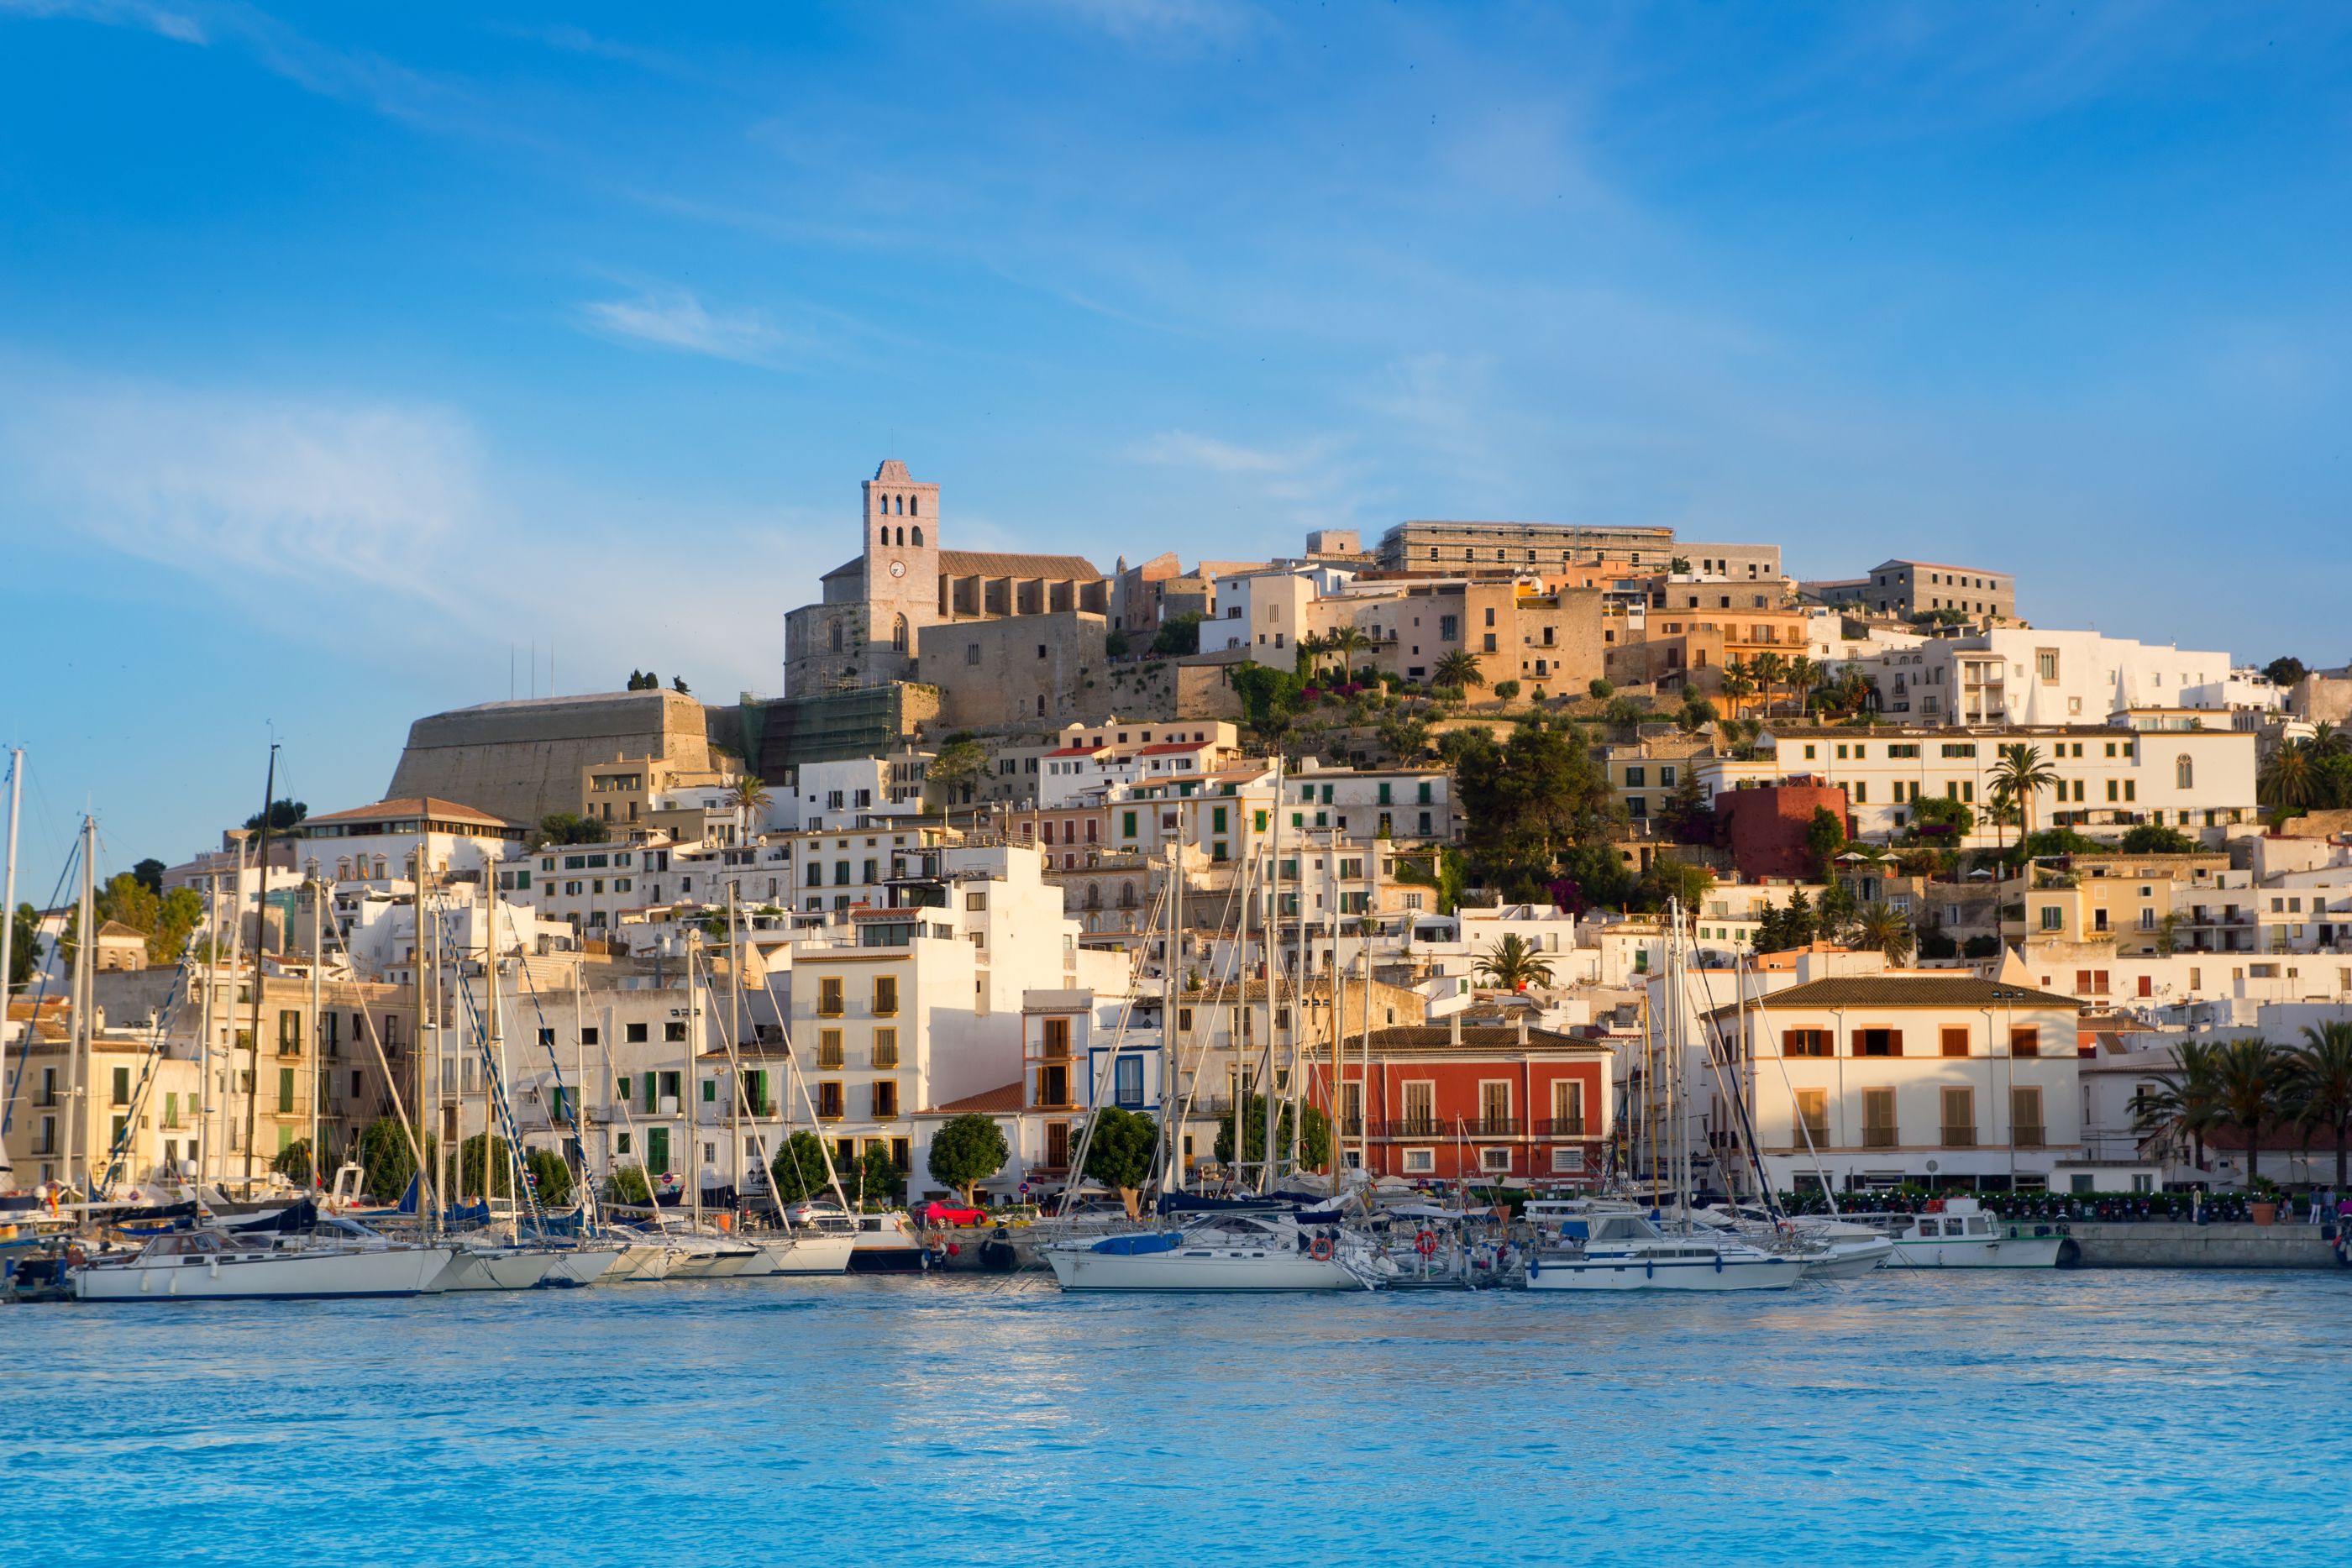 View of Ibiza old town from the water